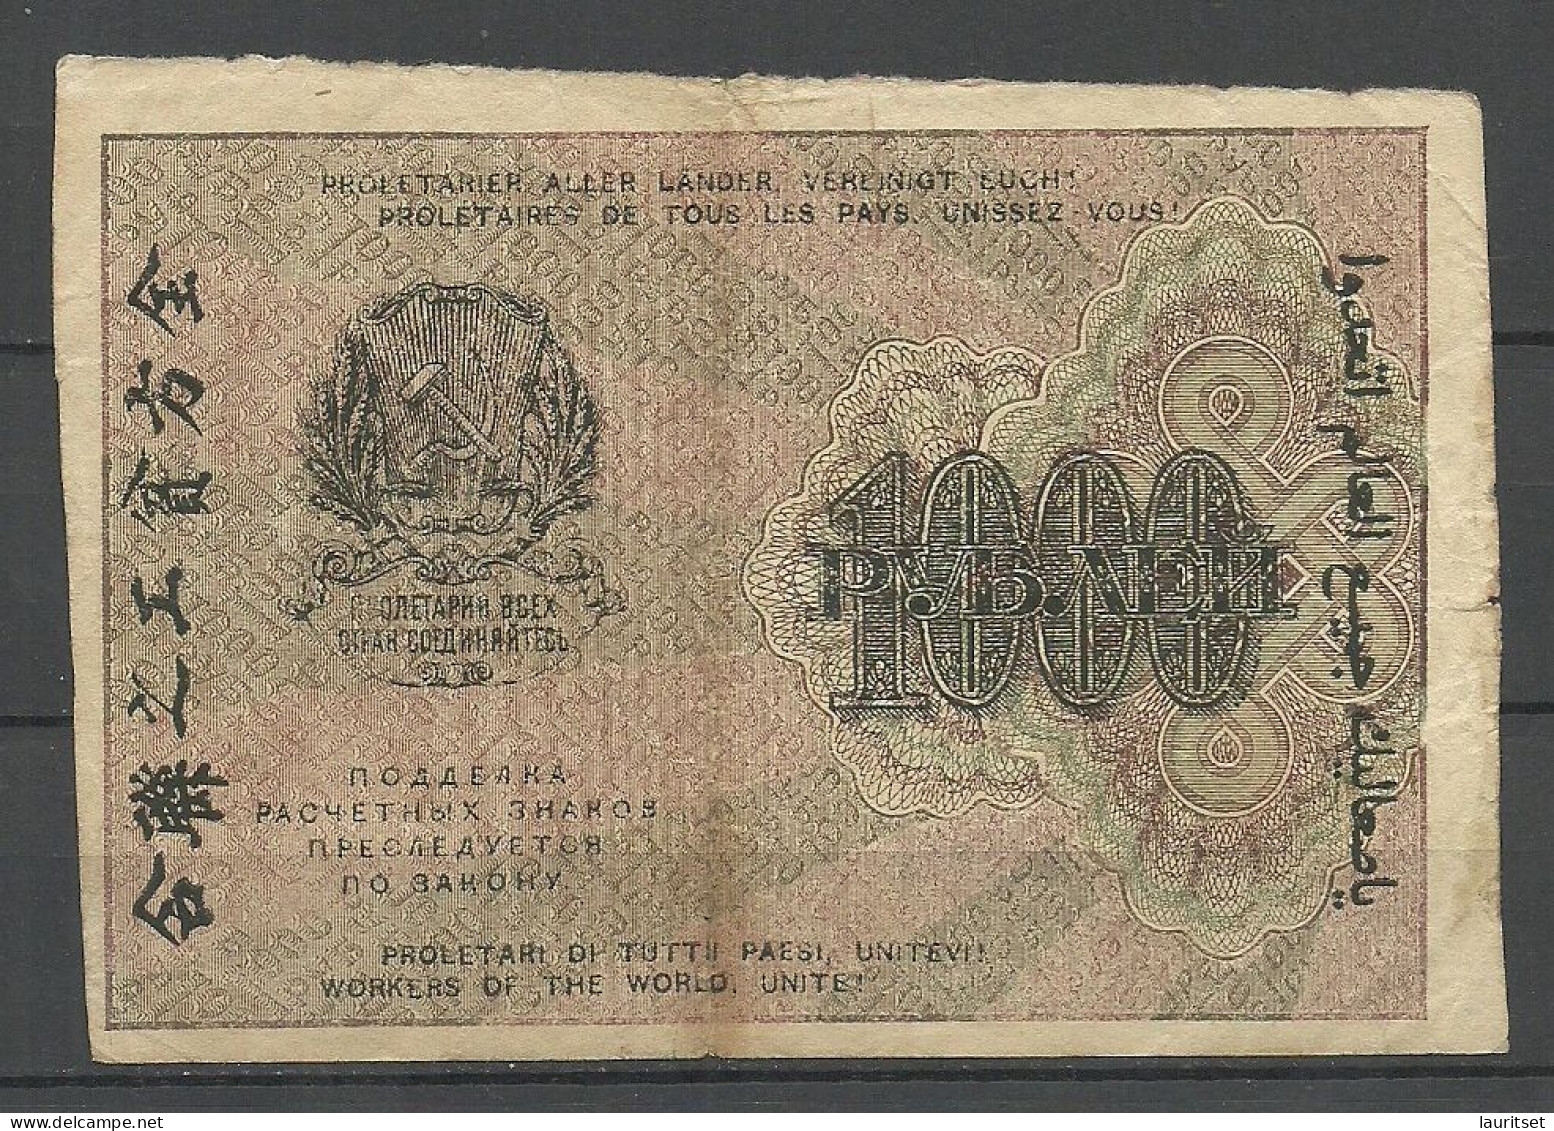 Imperial RUSSLAND RUSSIA Russie Banknote 1000 Roubles Bank Note 1919 - Russia